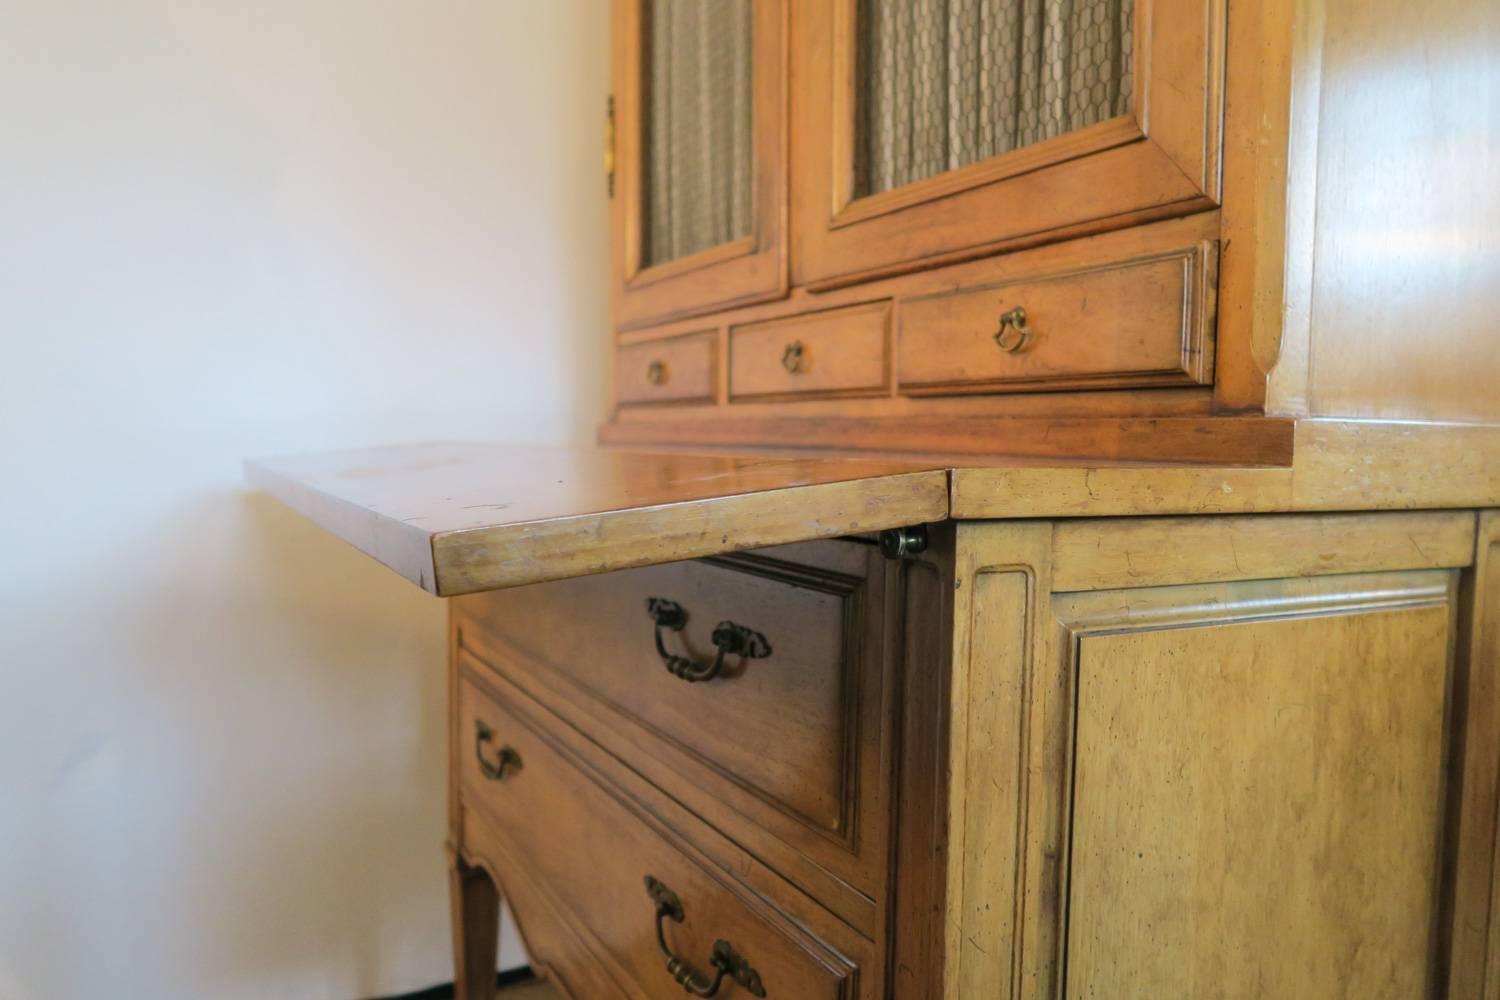 Beautiful Louis XVI Style Bodan Secretary Storage is Plentiful.  Beautiful Bodan Secretary Great Storage and Work Station with Antique Presence.  A Fabulous Work Station is Built in With Two Pull Outs to Rest the Desk Top On.  Two Chicken Wired and